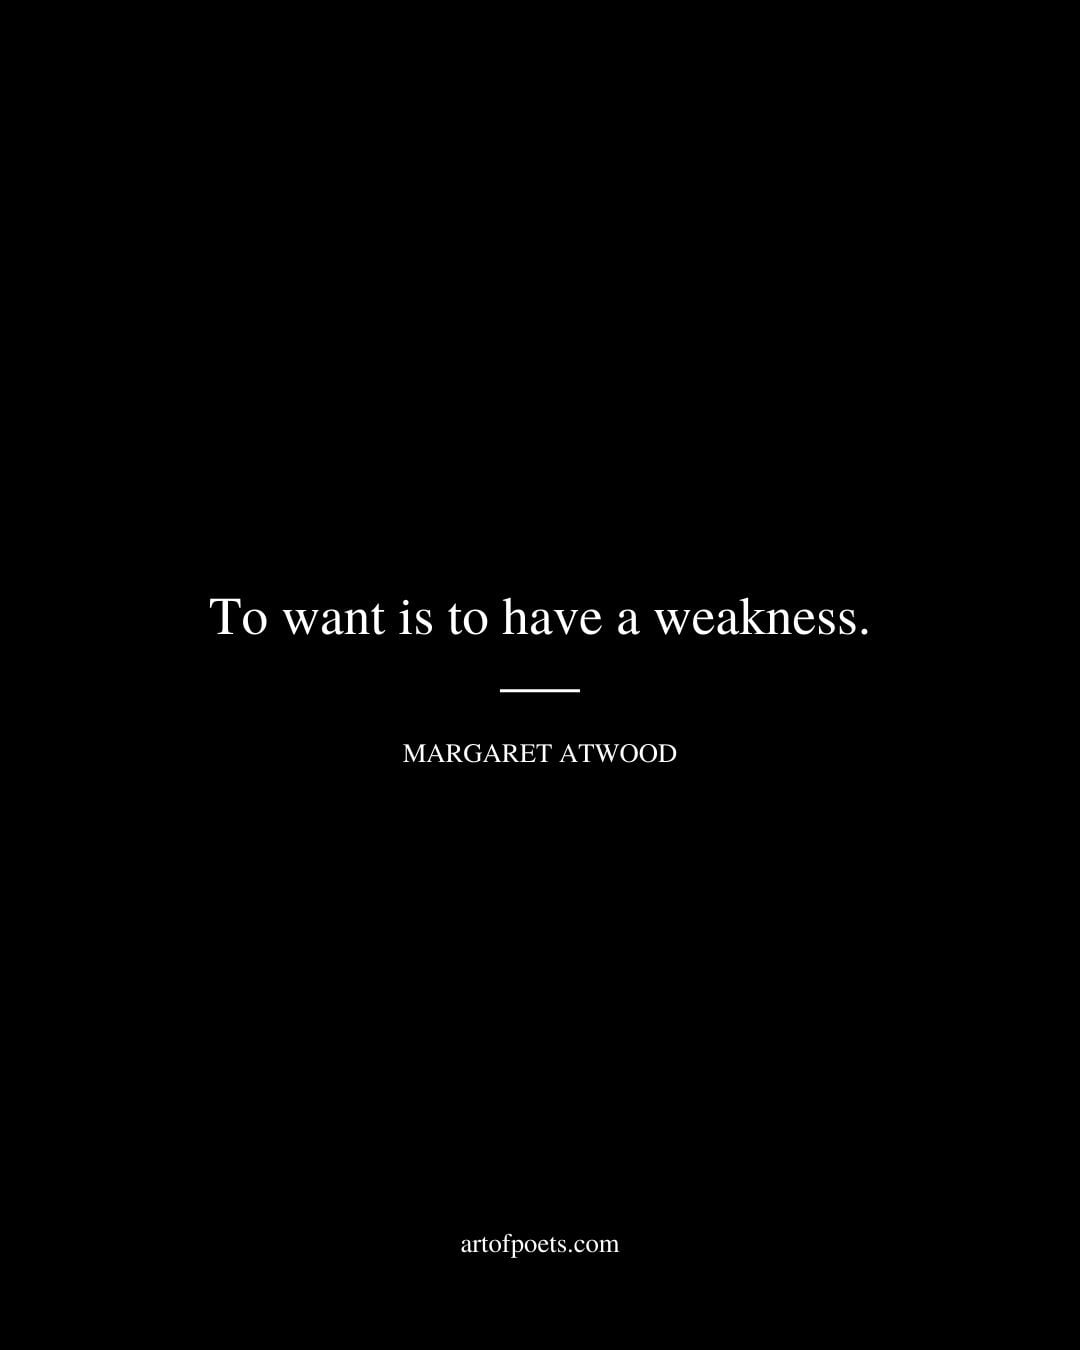 To want is to have a weakness. Margaret Atwood